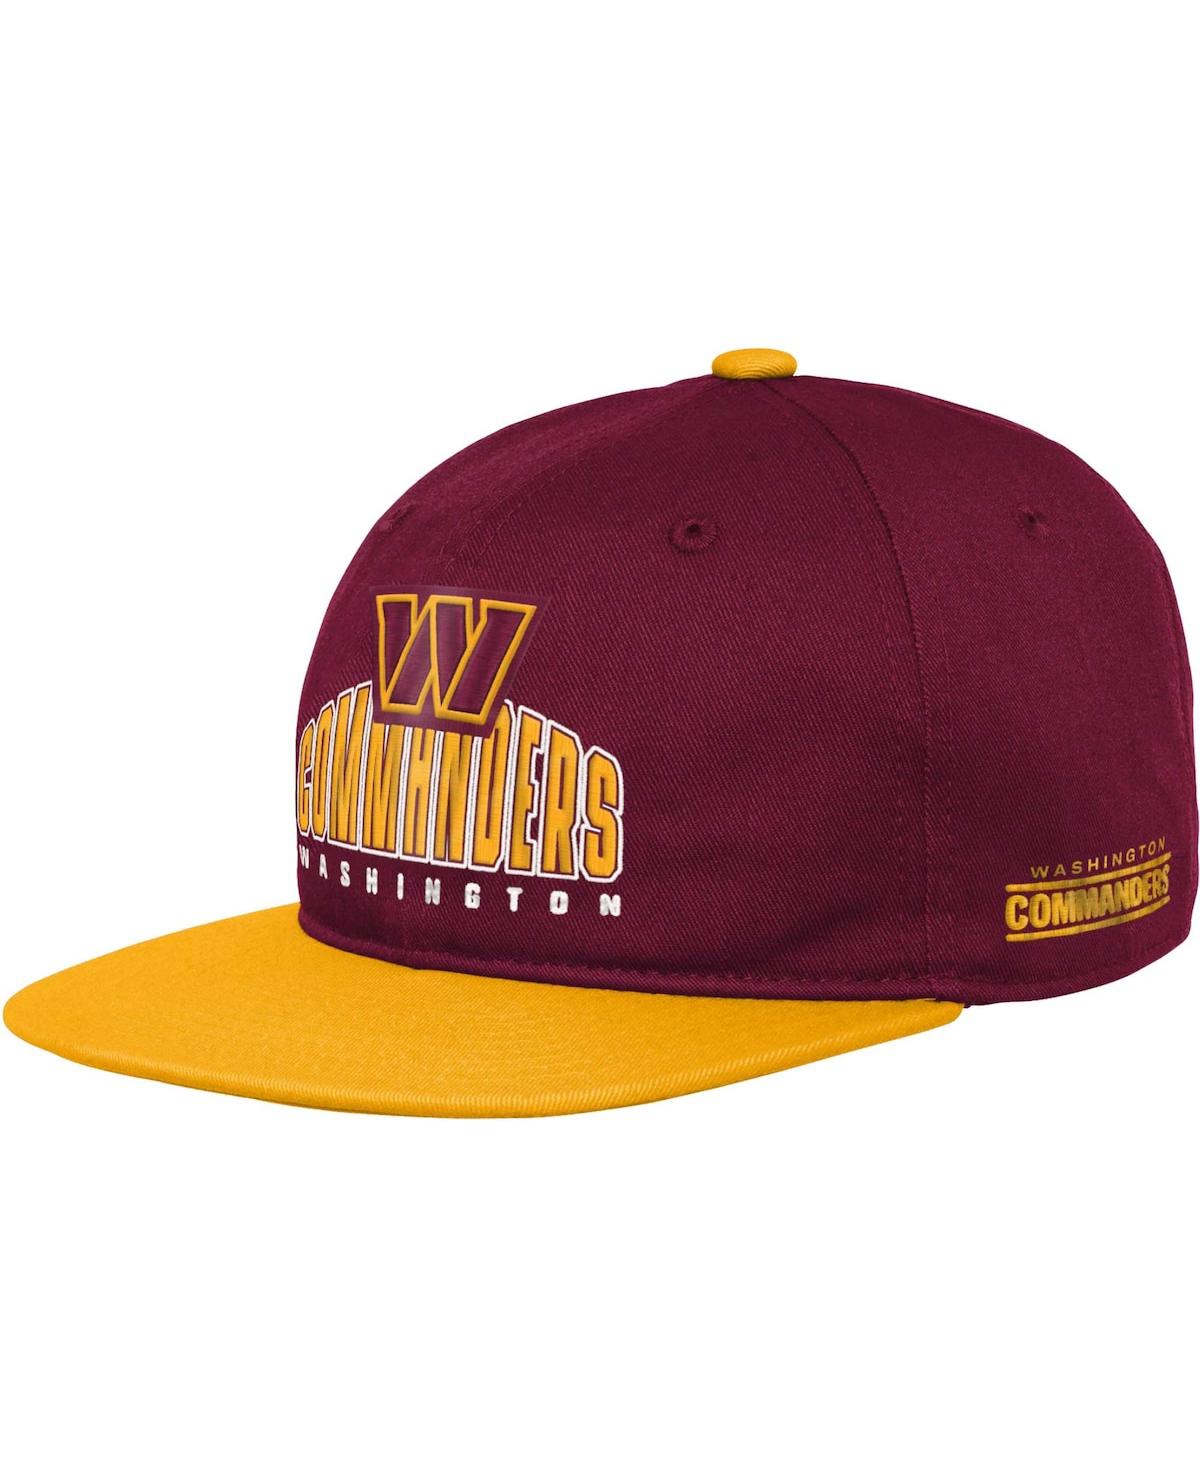 Outerstuff Kids' Youth Boys And Girls Burgundy Washington Commanders Legacy Dead Stock Snapback Hat